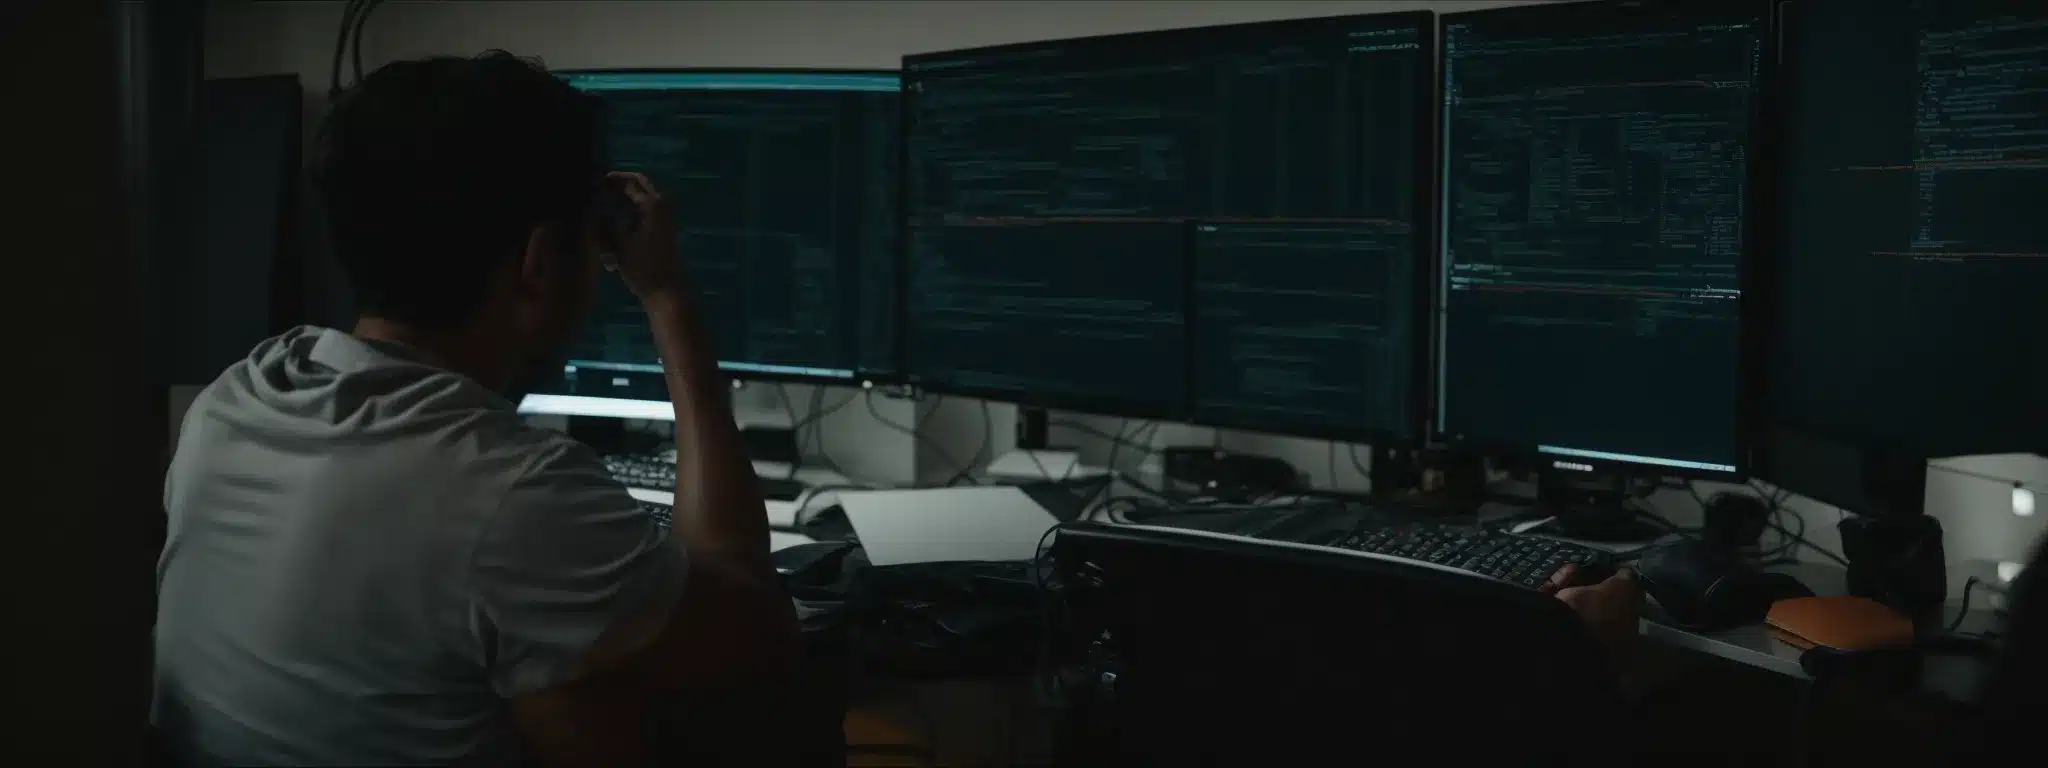 A Web Developer Sits In Front Of A Large Computer Monitor, Intently Examining Lines Of Code.